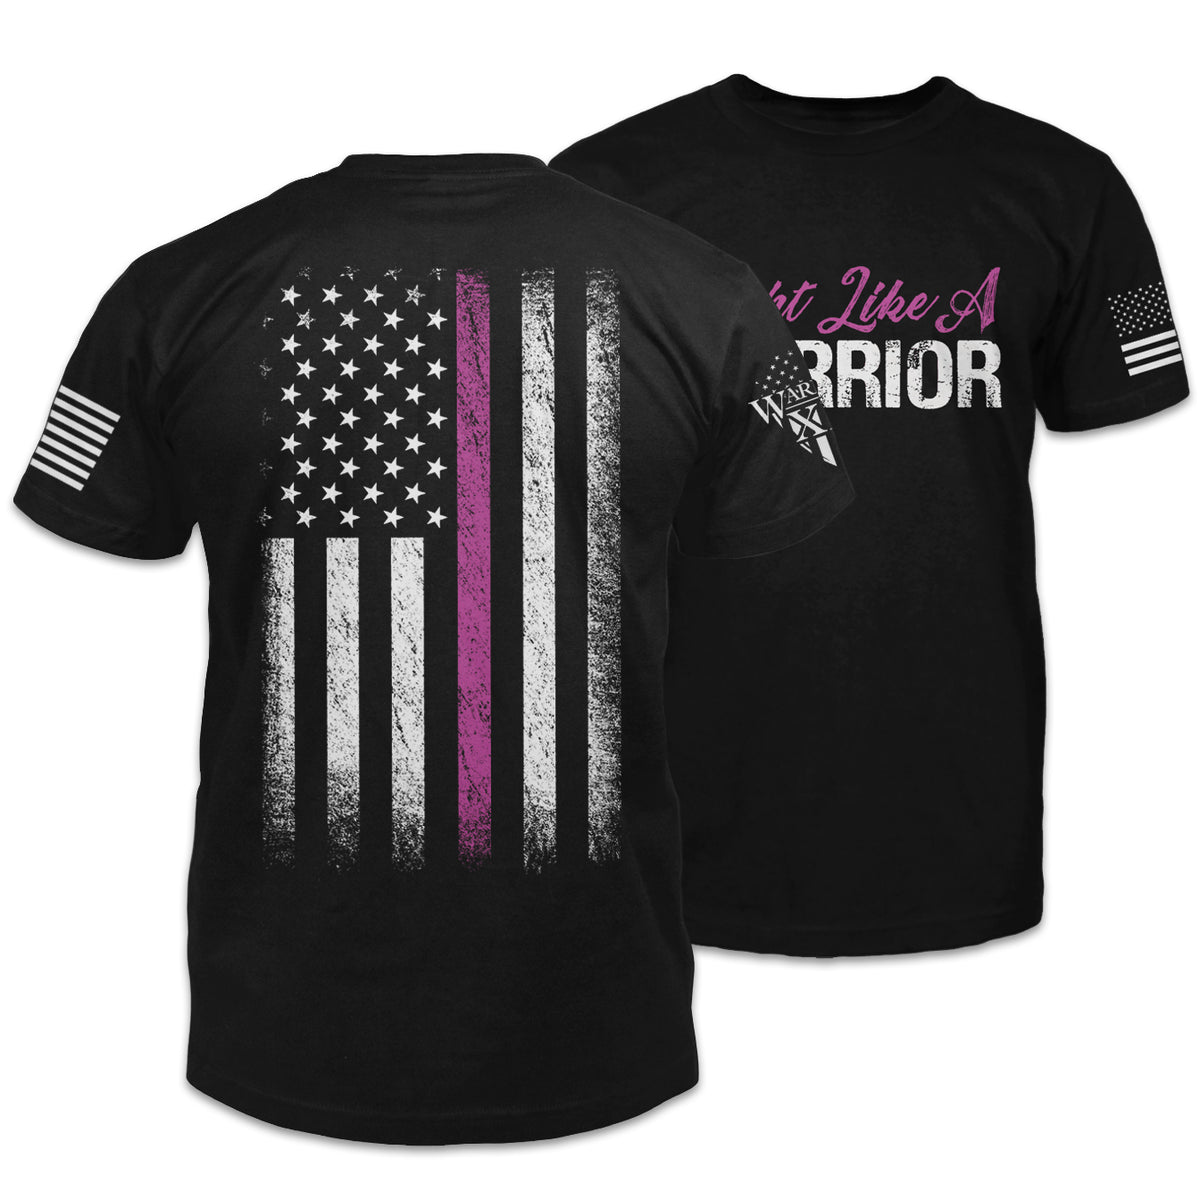 Front & back black t-shirt with shirt features a thin pink line flag to show support for all breast cancer warriors printed on the shirt.